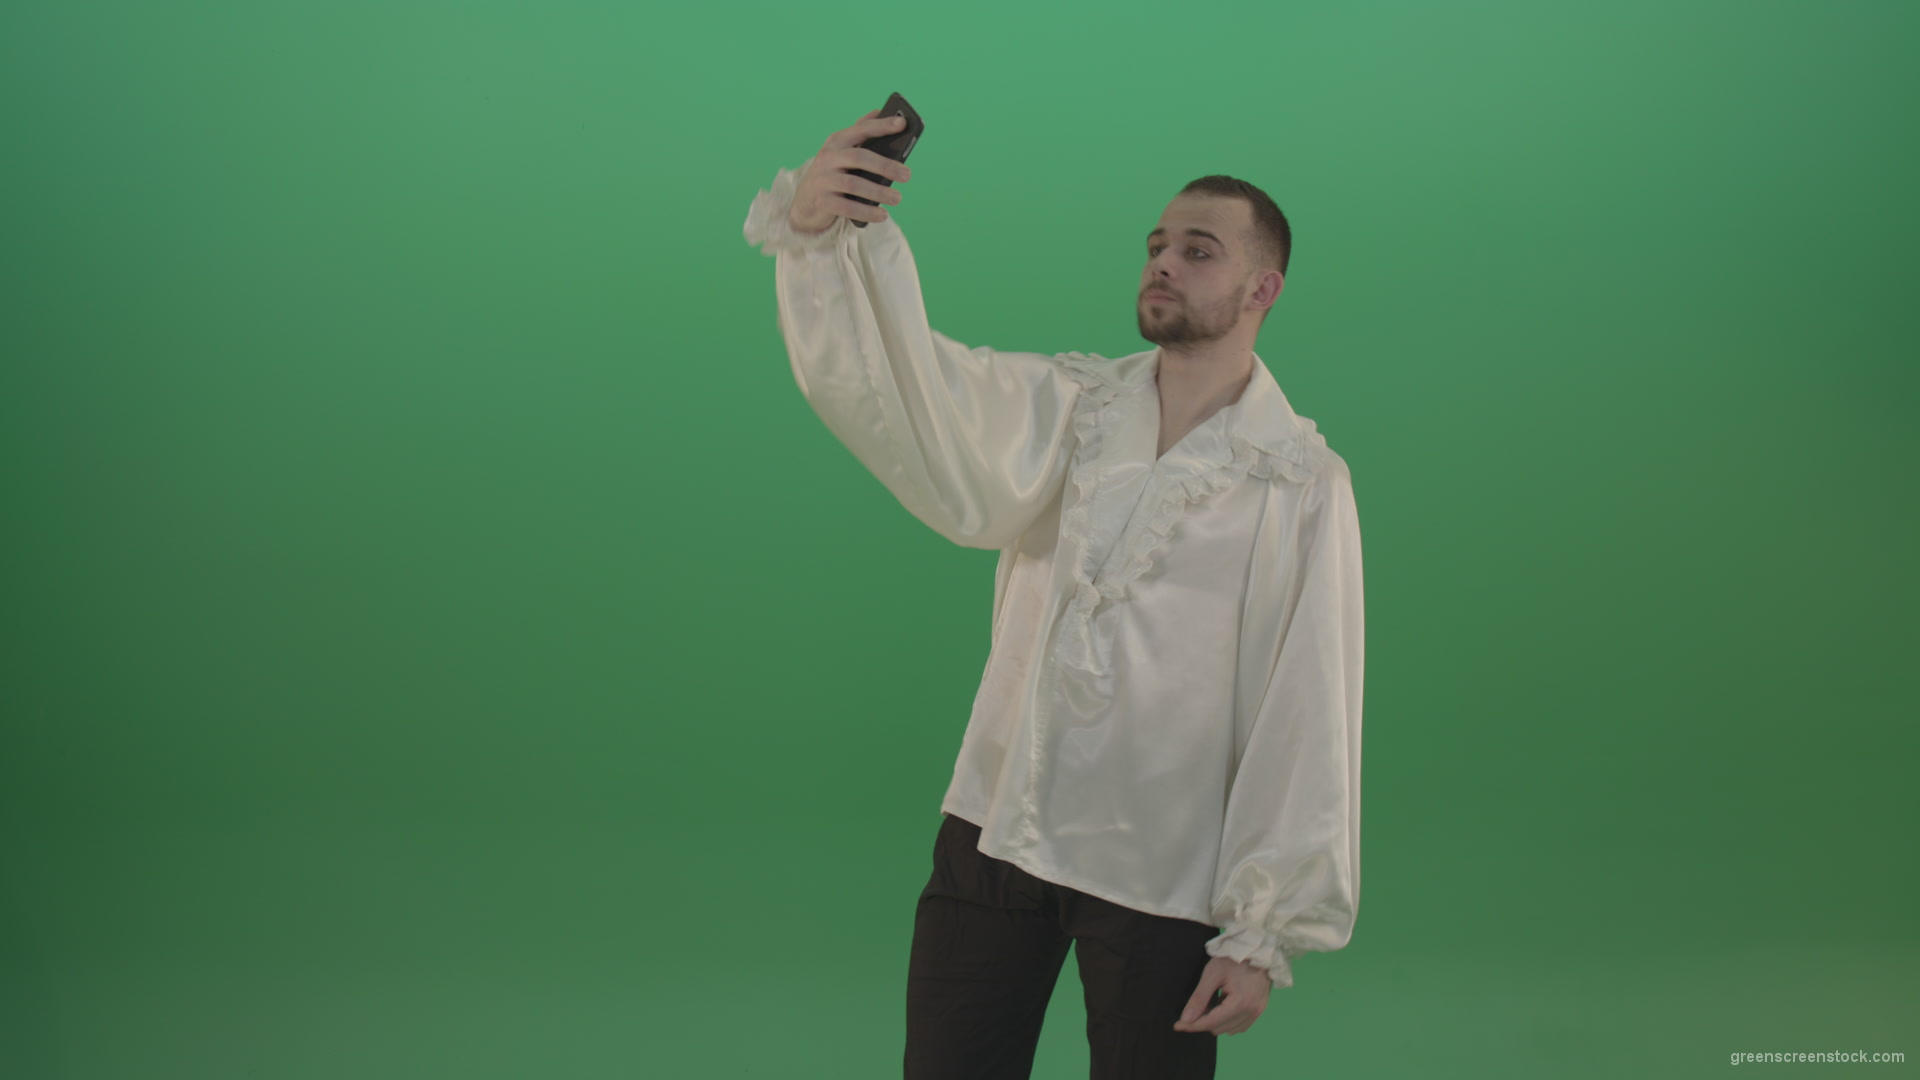 Guy-makes-a-selphi-and-posing-to-the-camera-isolated-on-green-screen_006 Green Screen Stock